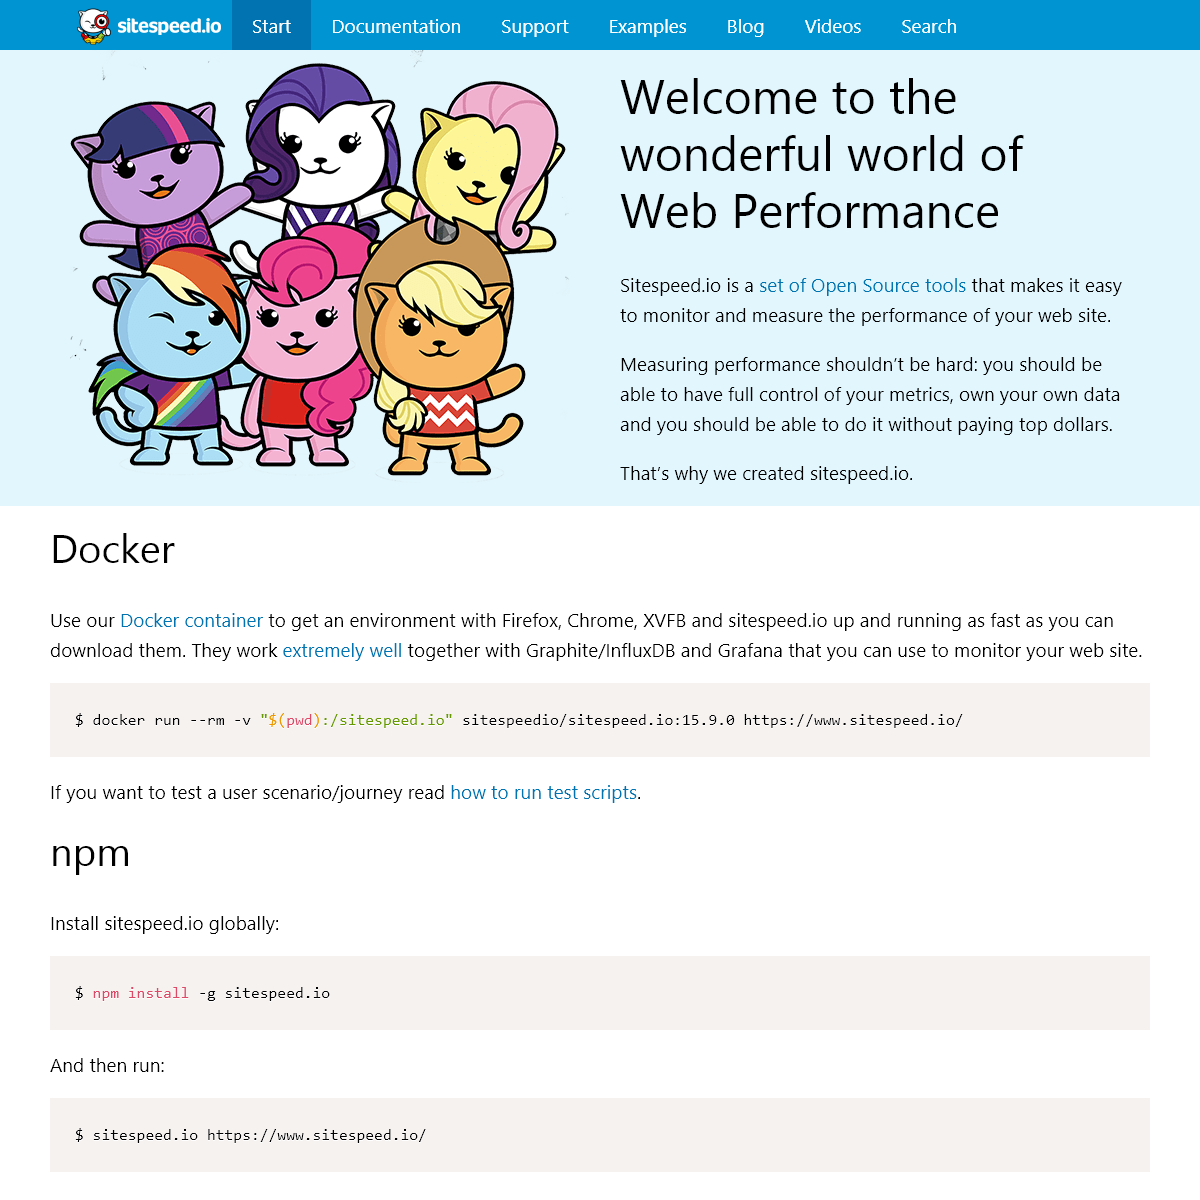 Welcome to the wonderful world of Web Performance